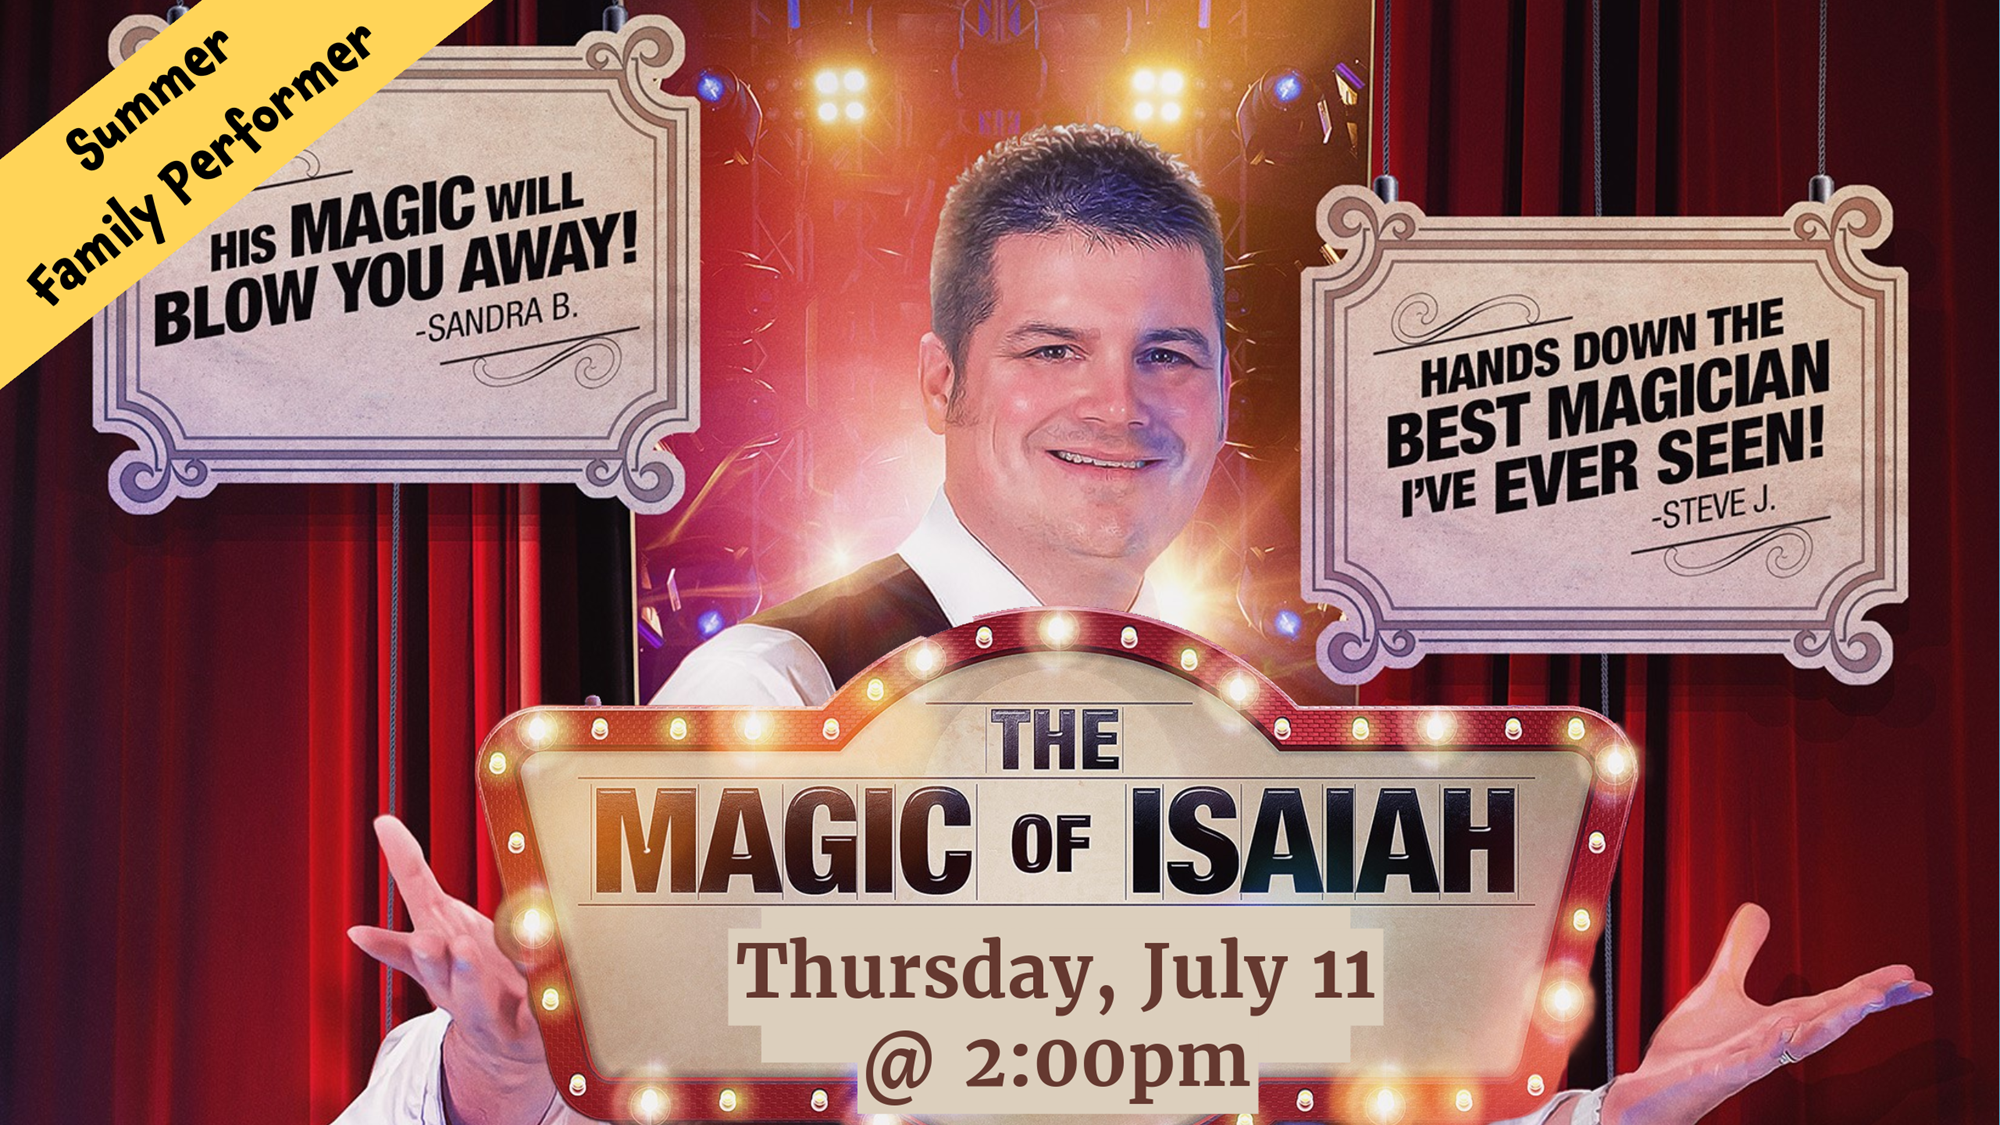 Summer Family Performer The Magic of Isaiah, Thursday, July 11 @ 2:00 PM. 